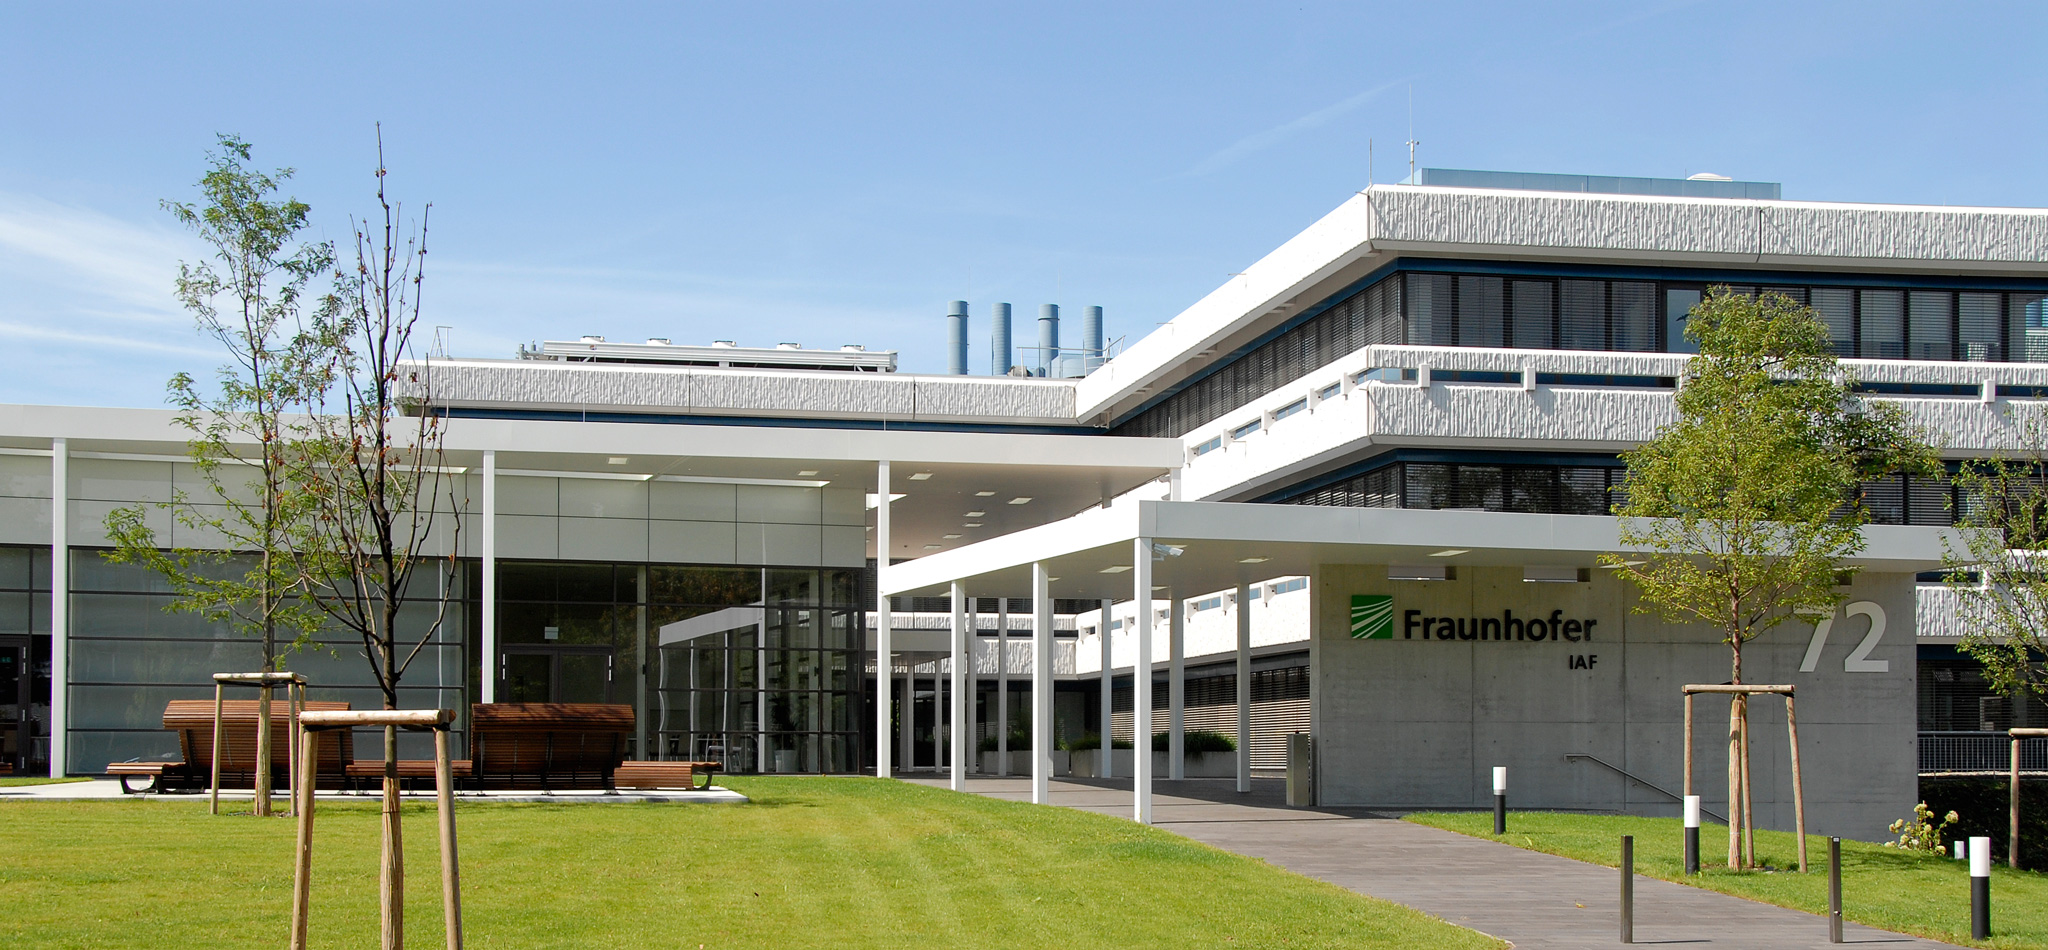 Building of the Fraunhofer Institute for Applied Solid State Physics in Freiburg Germany